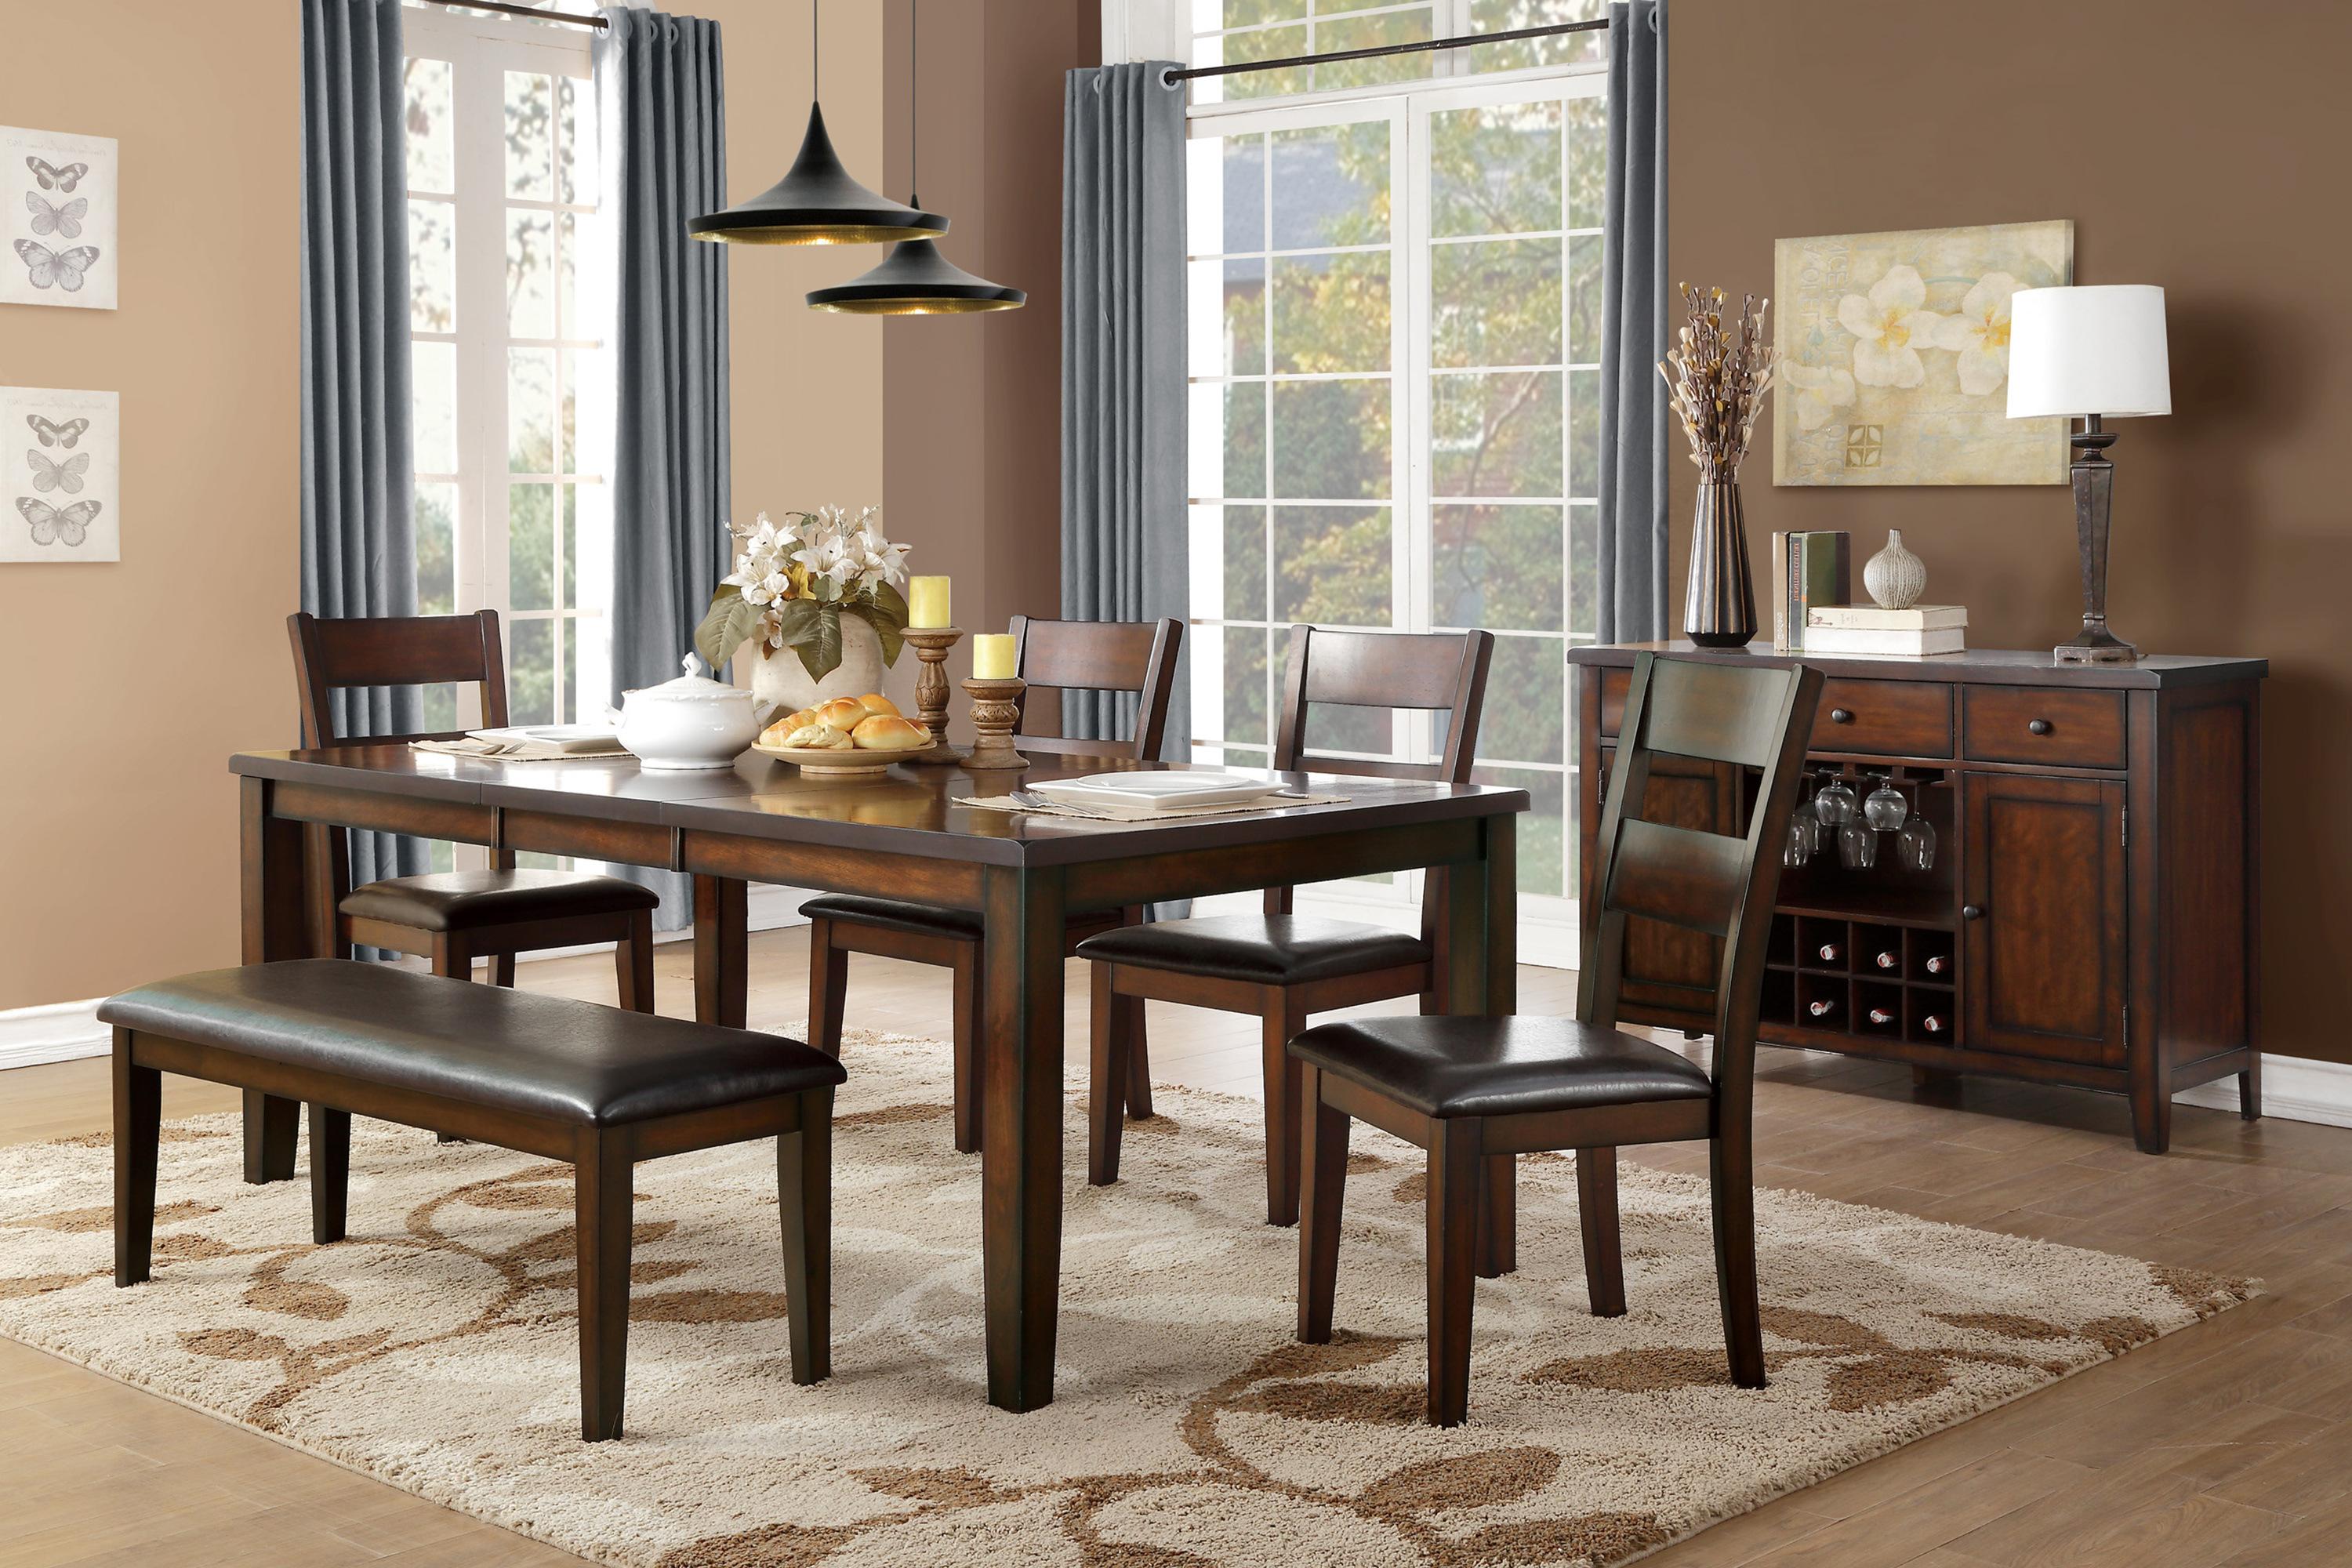 Transitional Dining Room Set 5547-78*6PC Mantello 5547-78*6PC in Cherry Faux Leather